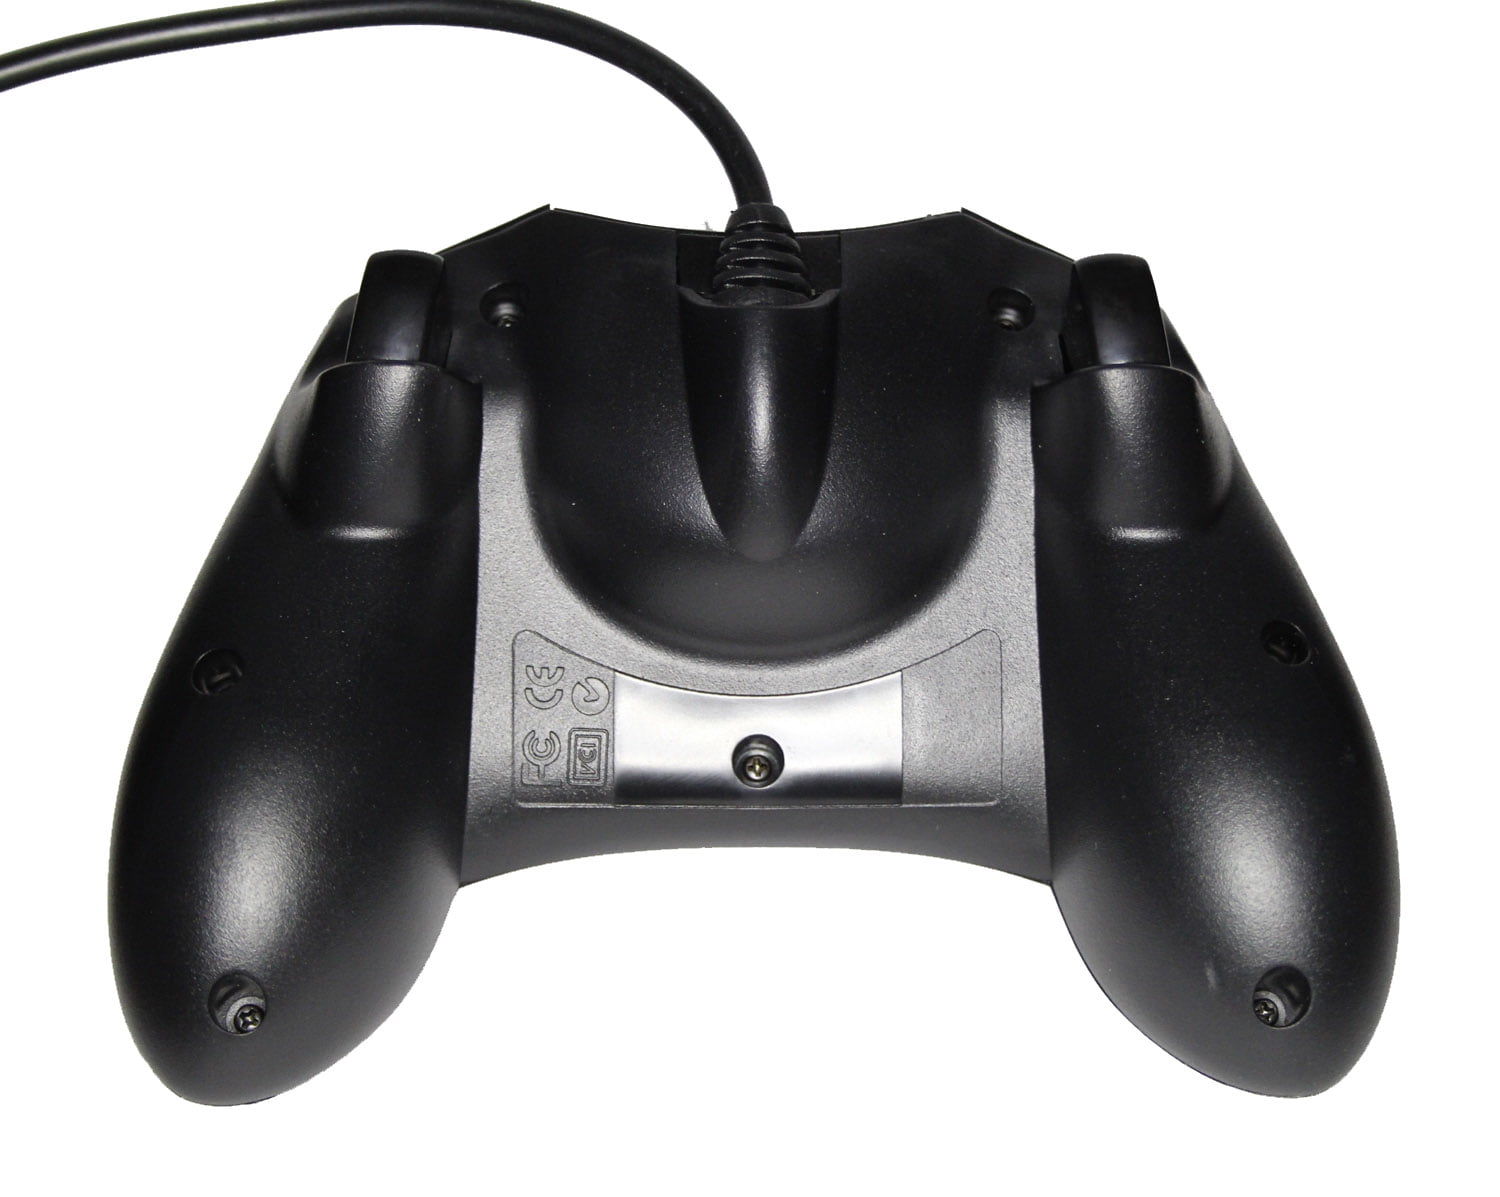 Get this new version of the original Xbox controller for an all